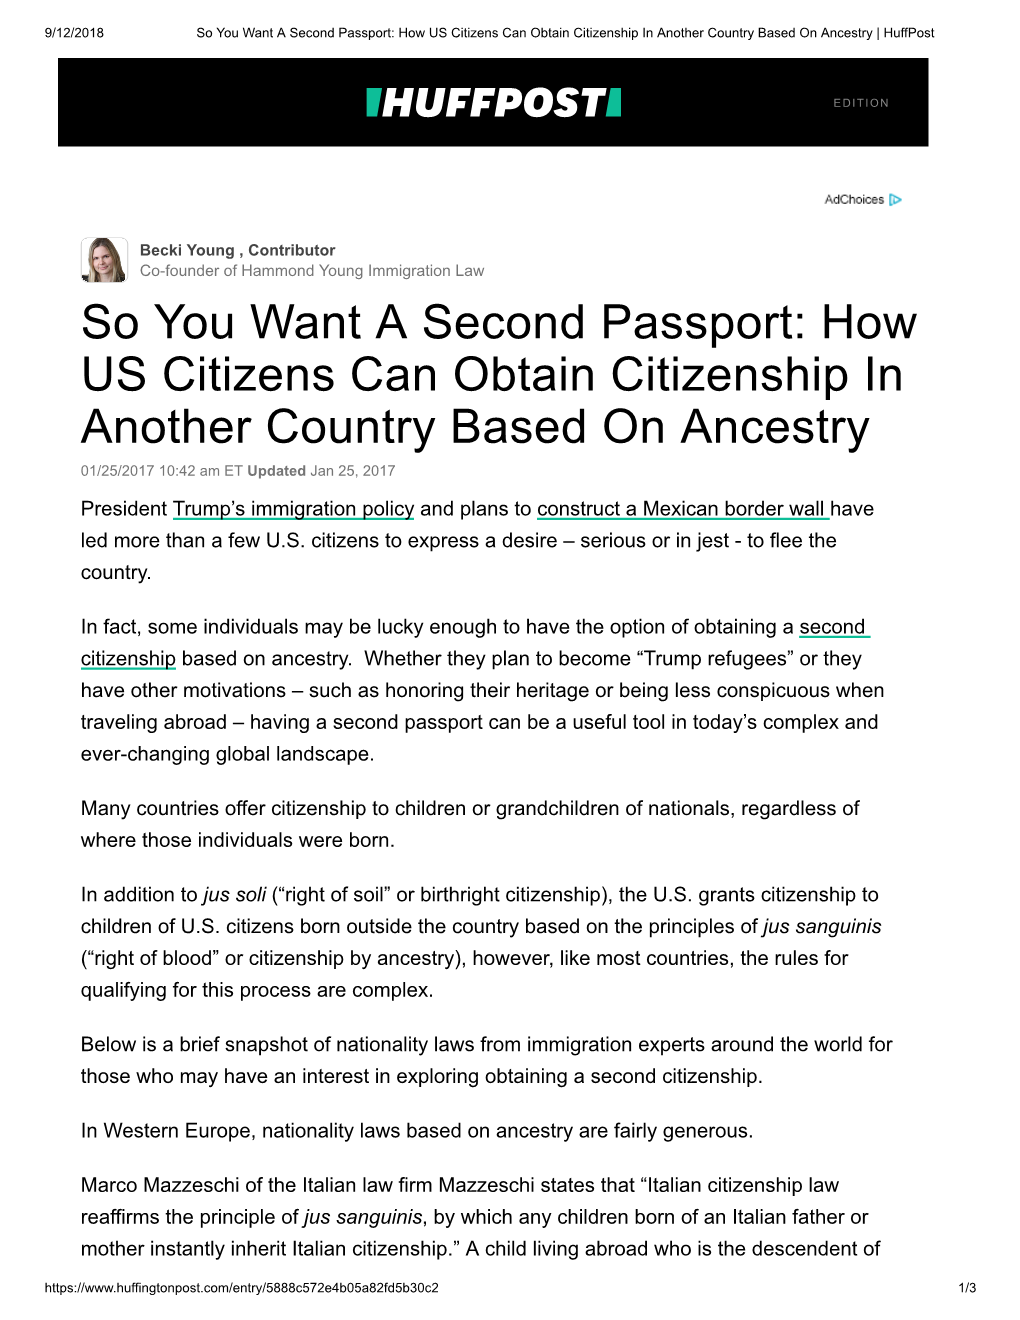 So You Want a Second Passport: How US Citizens Can Obtain Citizenship in Another Country Based on Ancestry | Huffpost